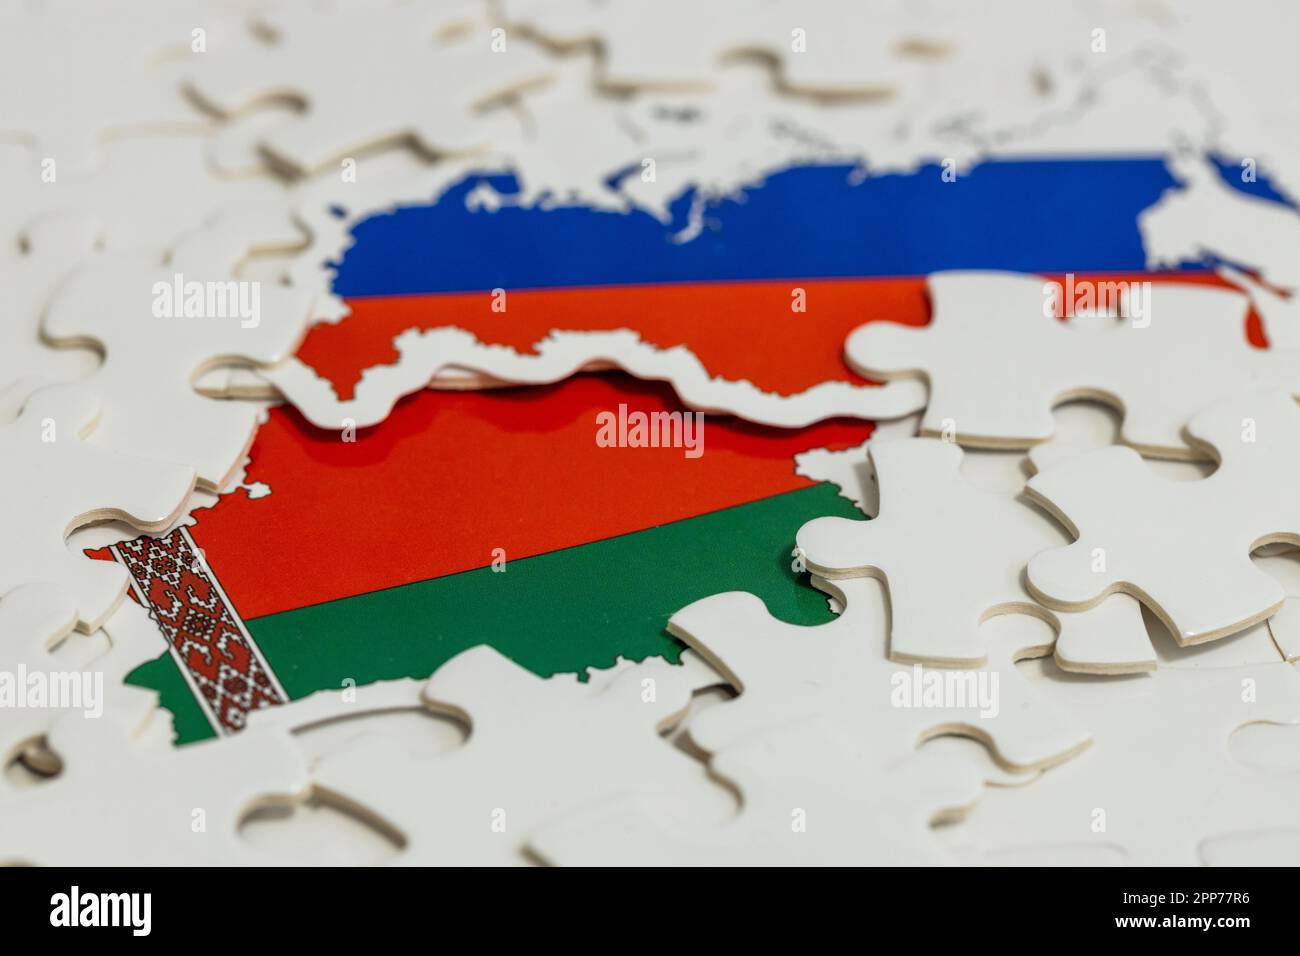 Flags of Russia and Belarus among scattered puzzle pieces, Concept of Geopolitical puzzle, military and economic alliance of both countries Stock Photo